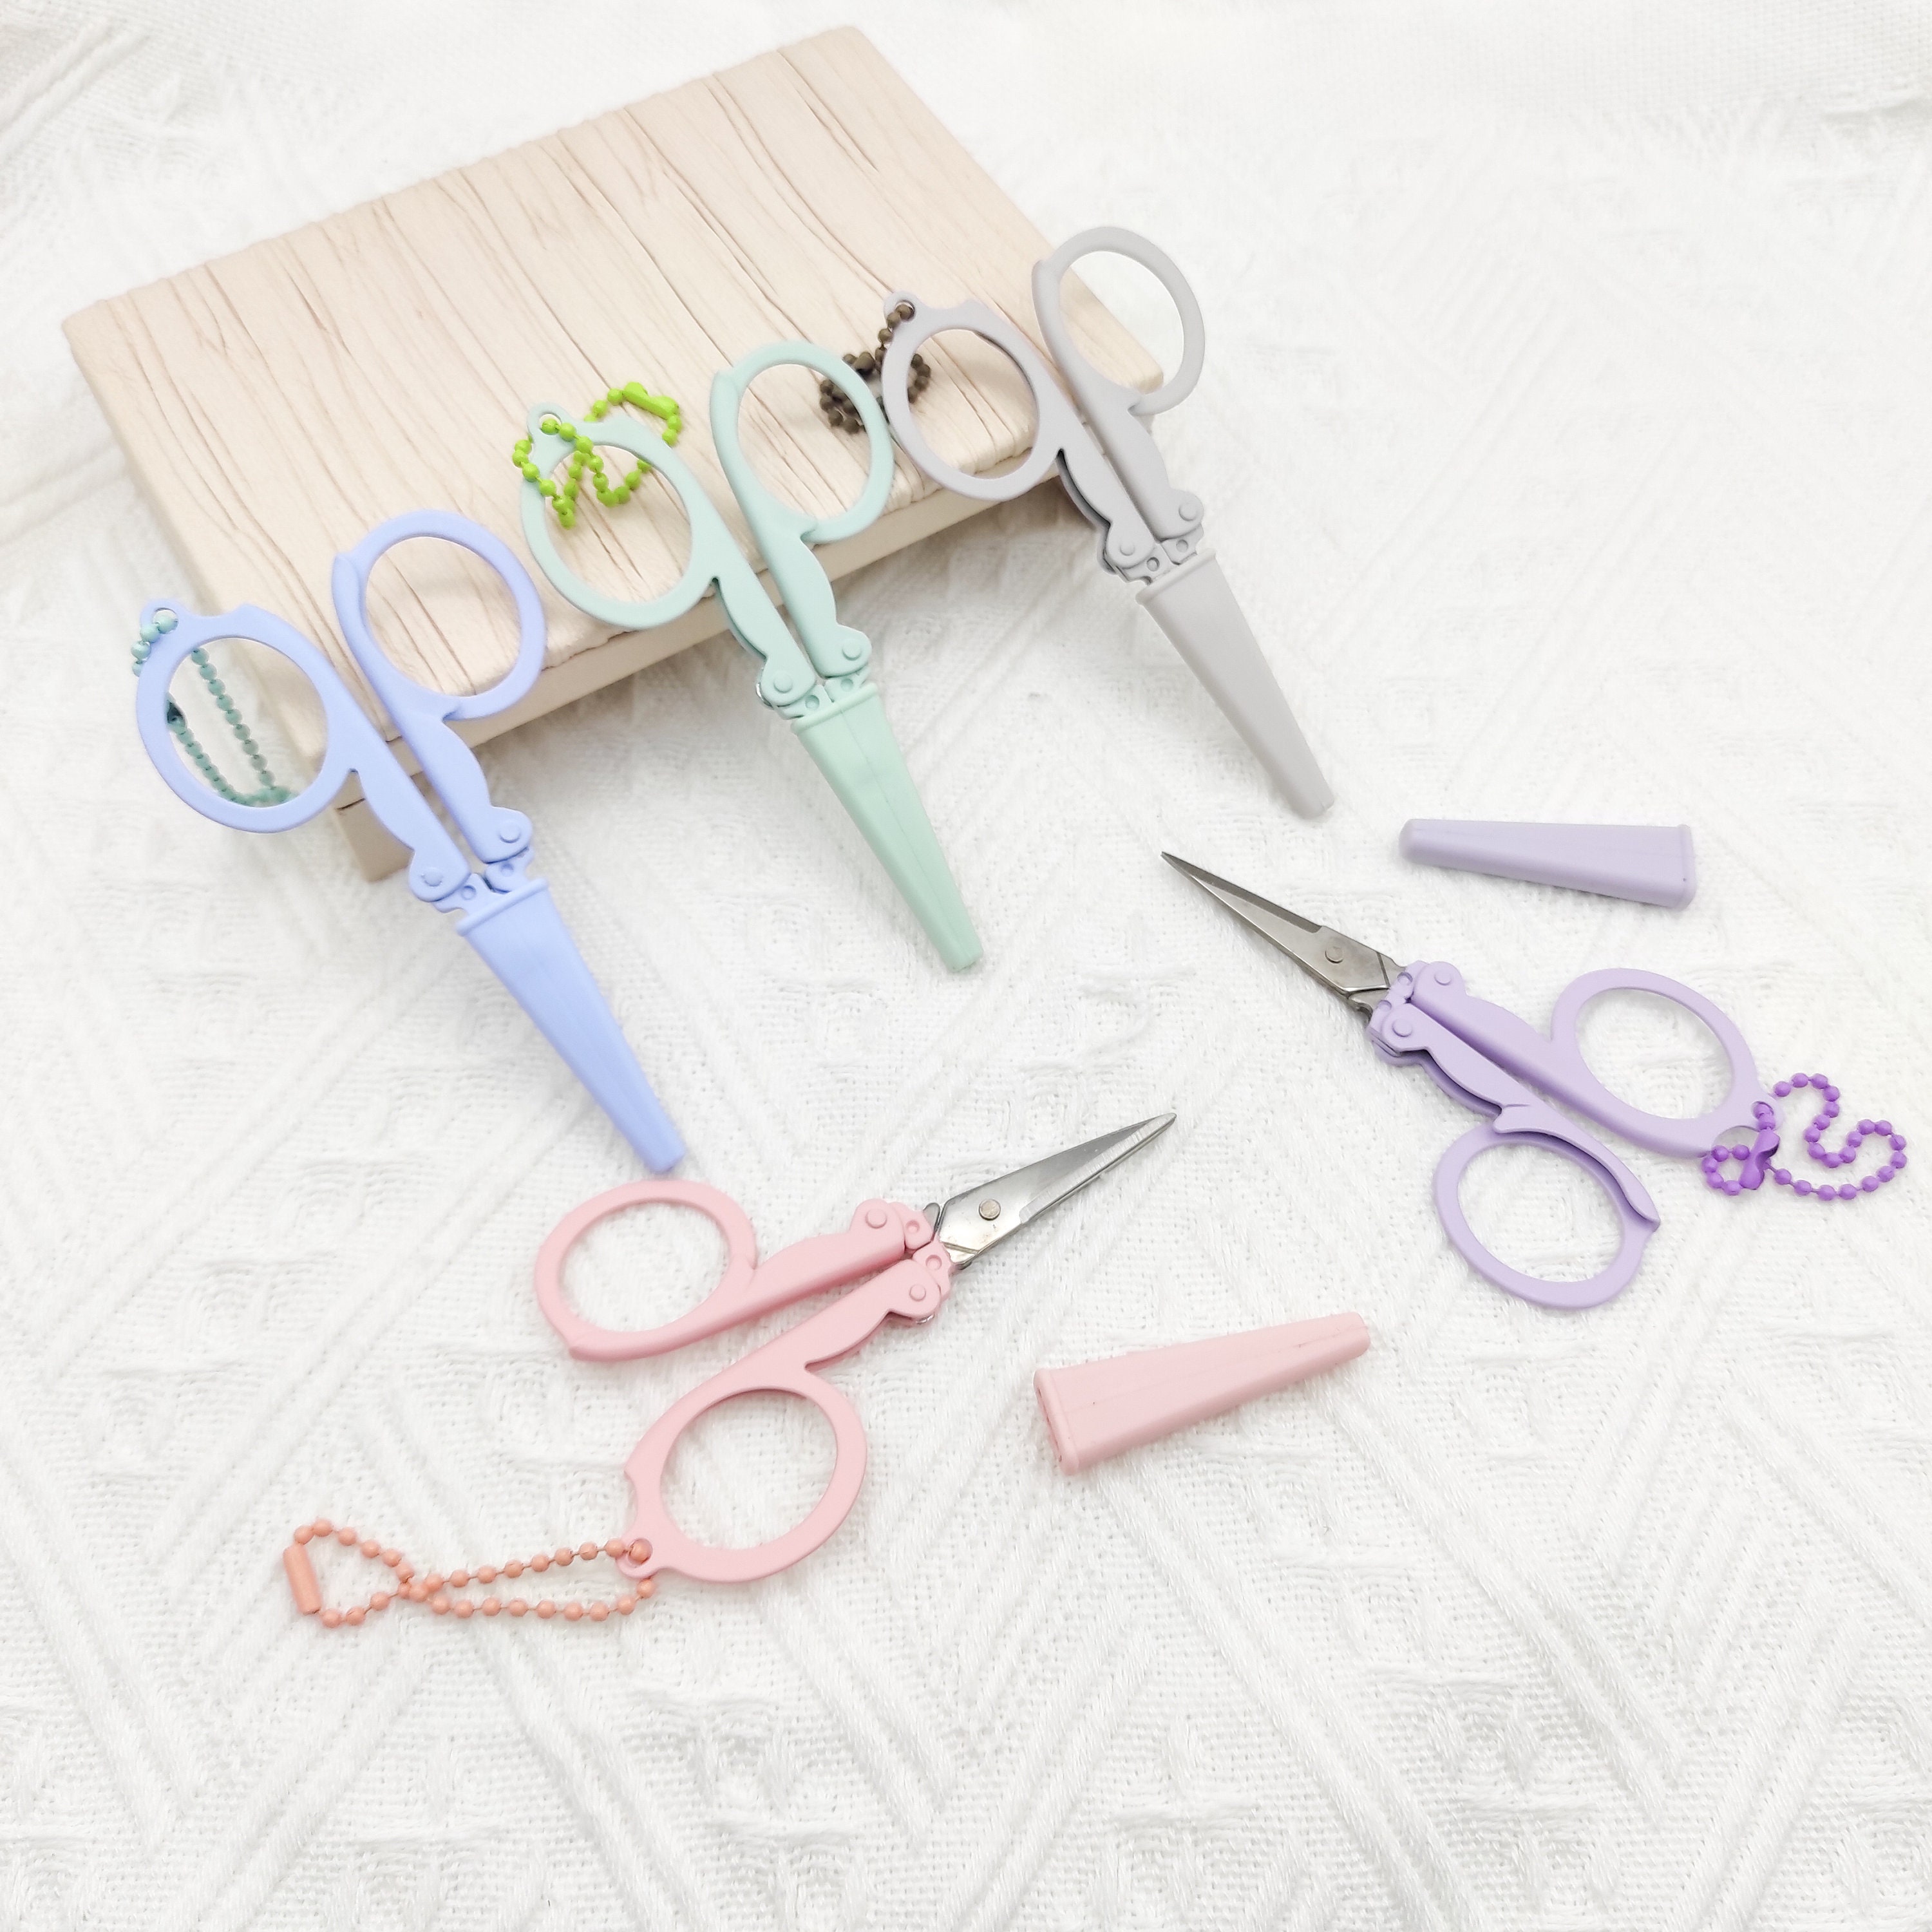 Mini Foldable Scissors With Sharp Blades For Travel, Embroidery, And  Tailoring Small Crafts Pocket Travel Scissor From Stay_home, $0.33